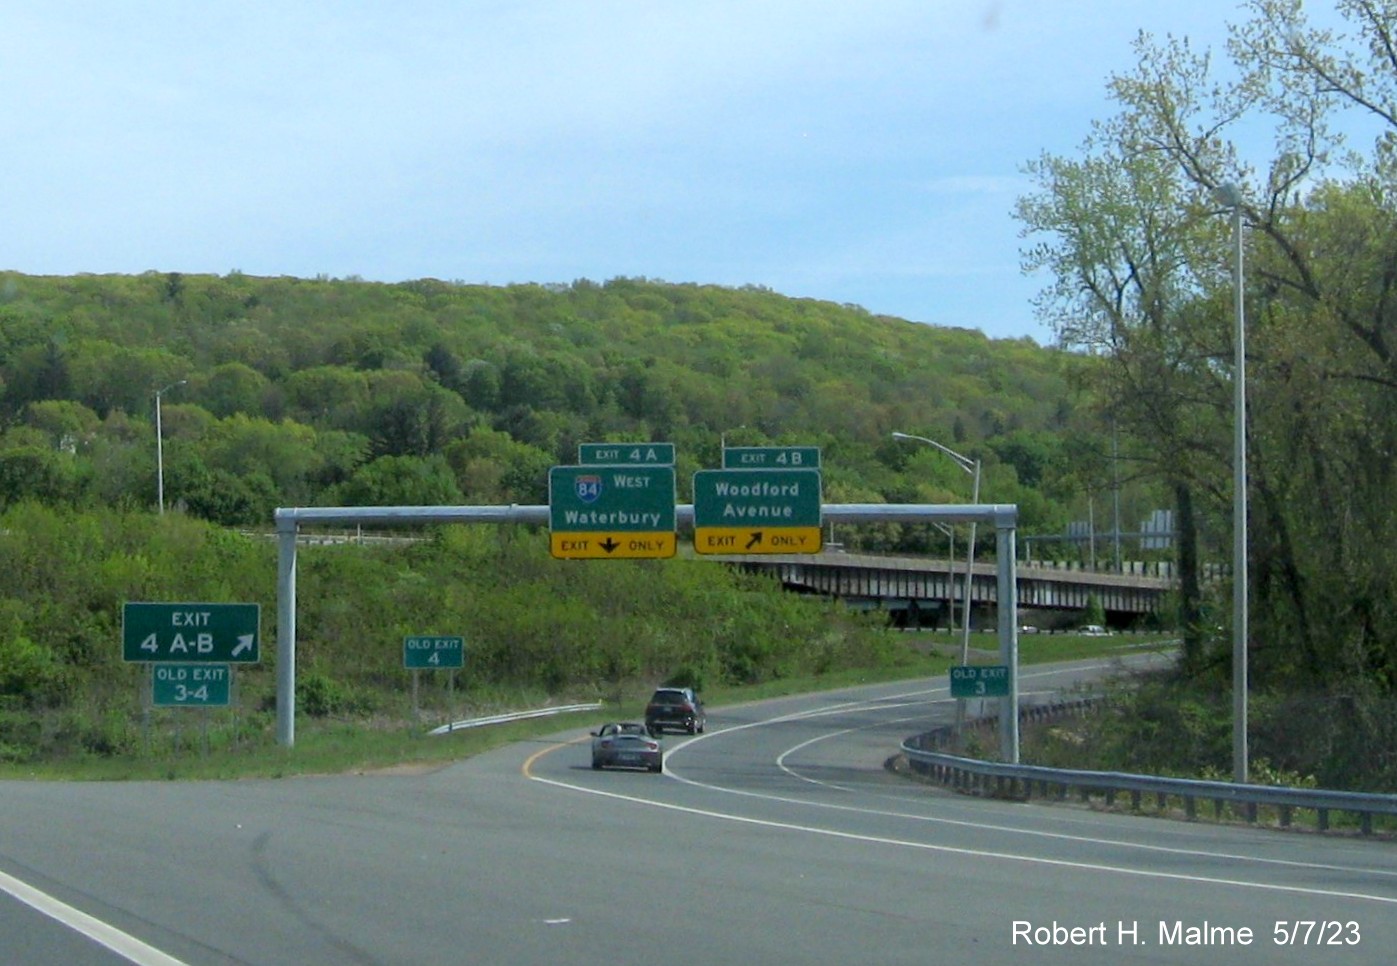 Image of overhead signage from CT 72 East on ramp to I-84 West/Woodford Avenue in Bristol, May 2023